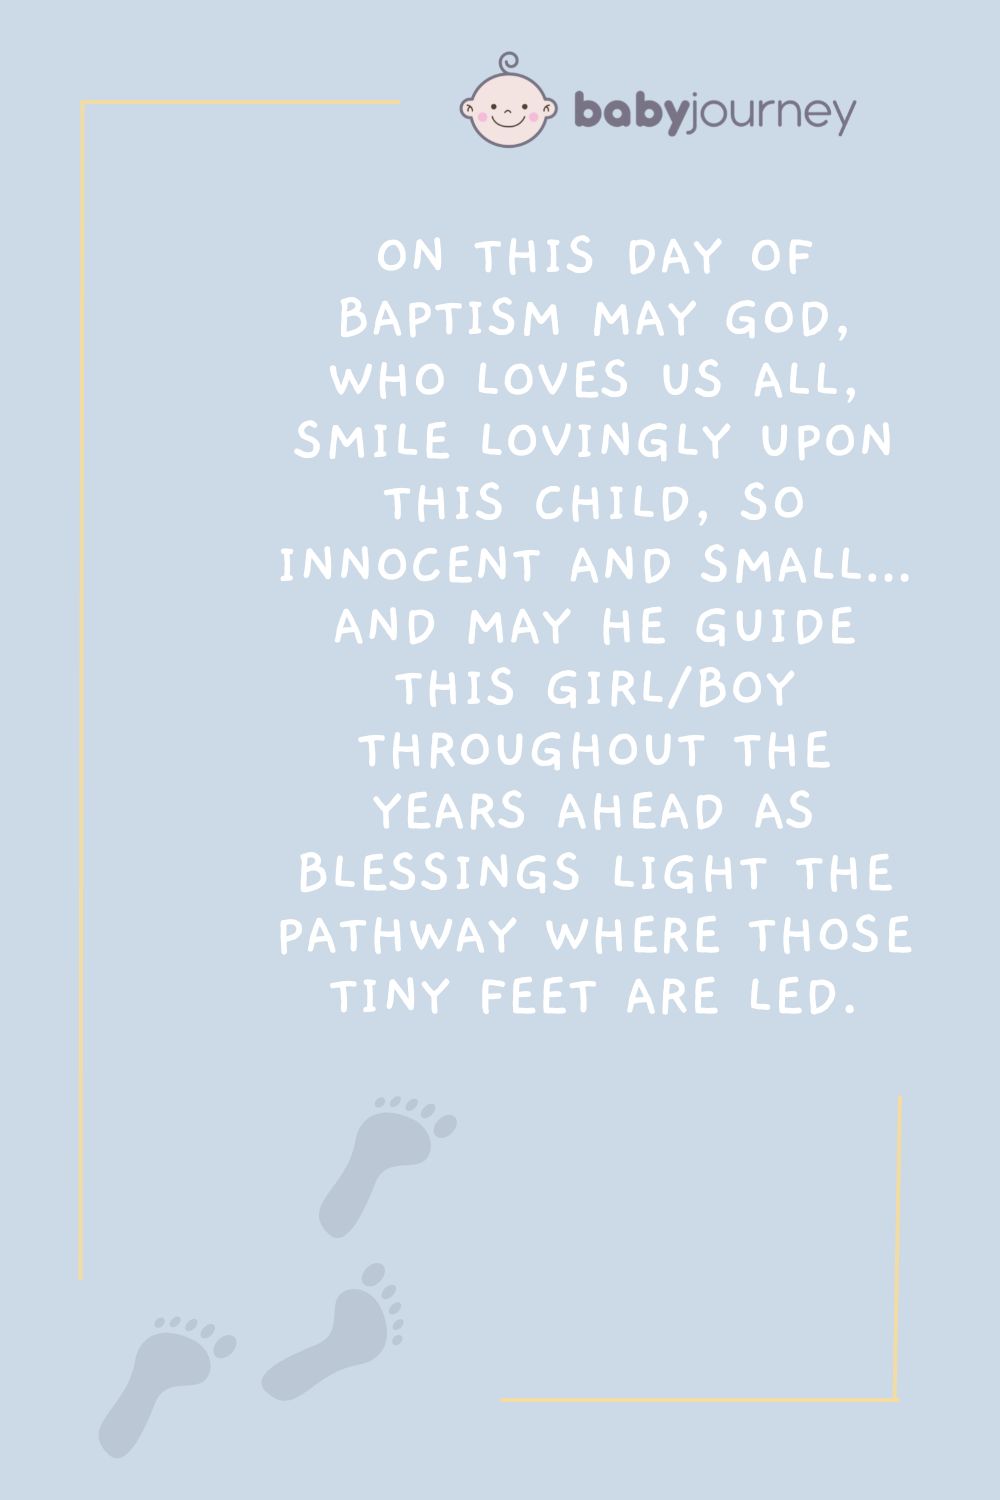 On this day of baptism may God, who loves us all, smile lovingly upon this child, so innocent and small - Inspirational Baptism Quotes for Card - Baby Journey